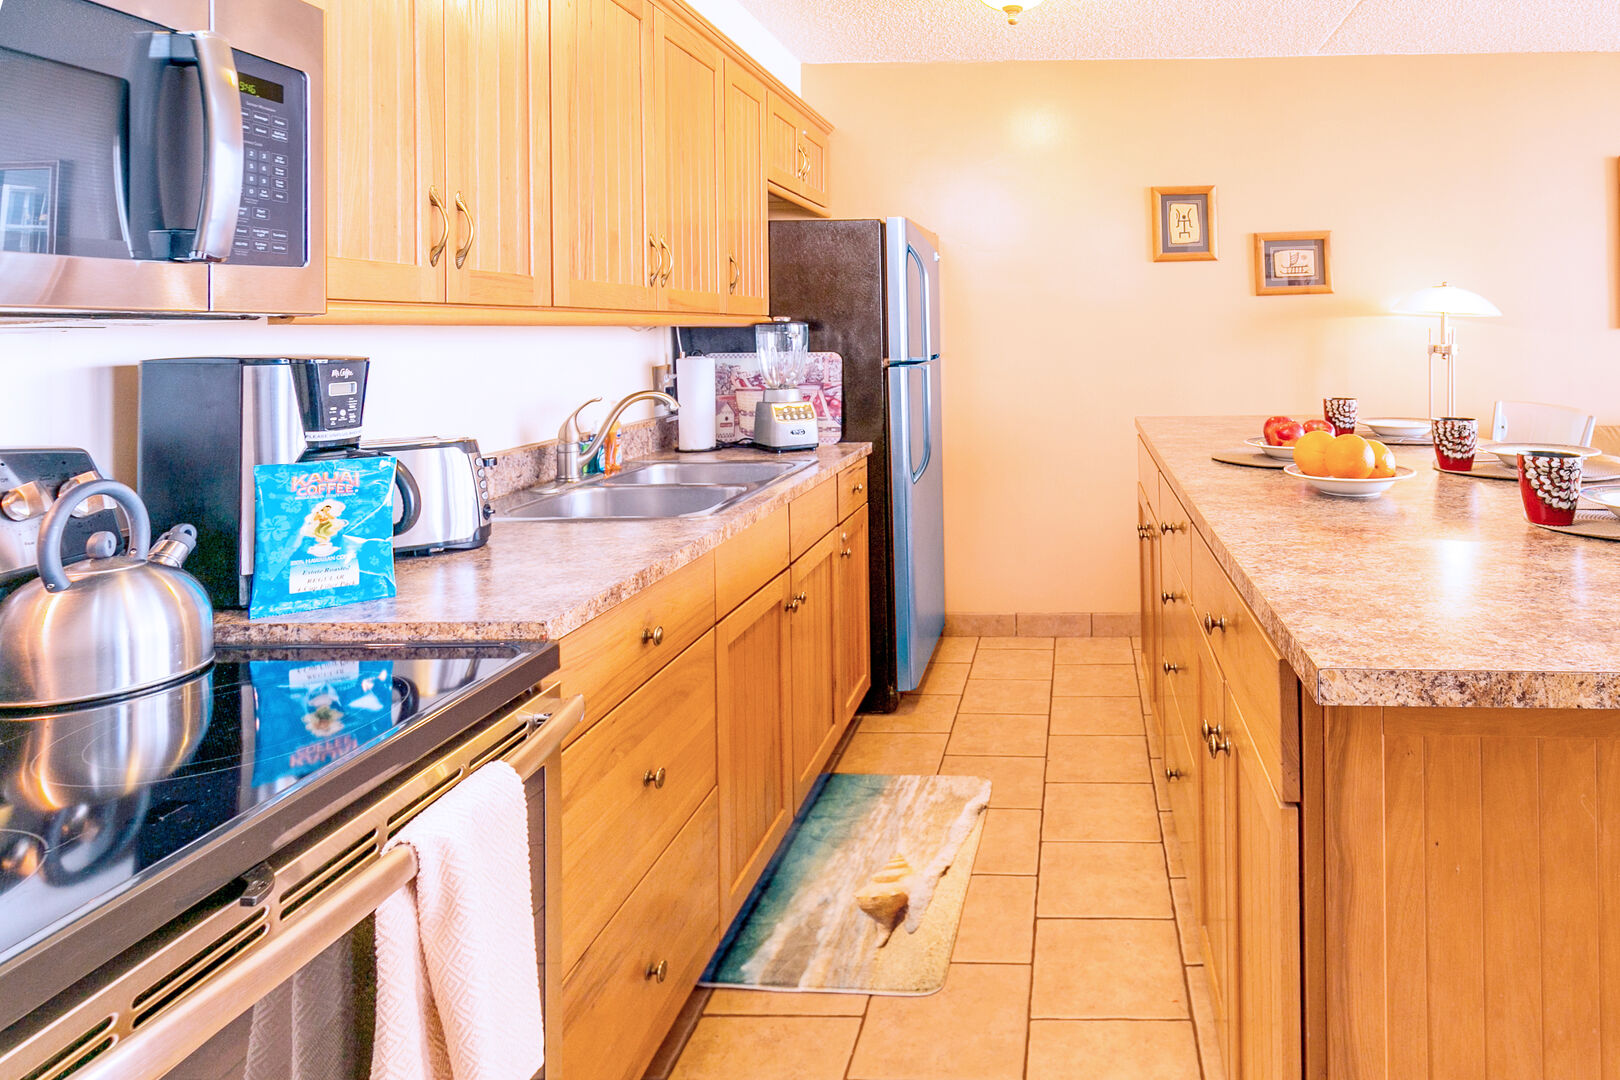 There is a fully-equipped kitchen perfect for your culinary needs!